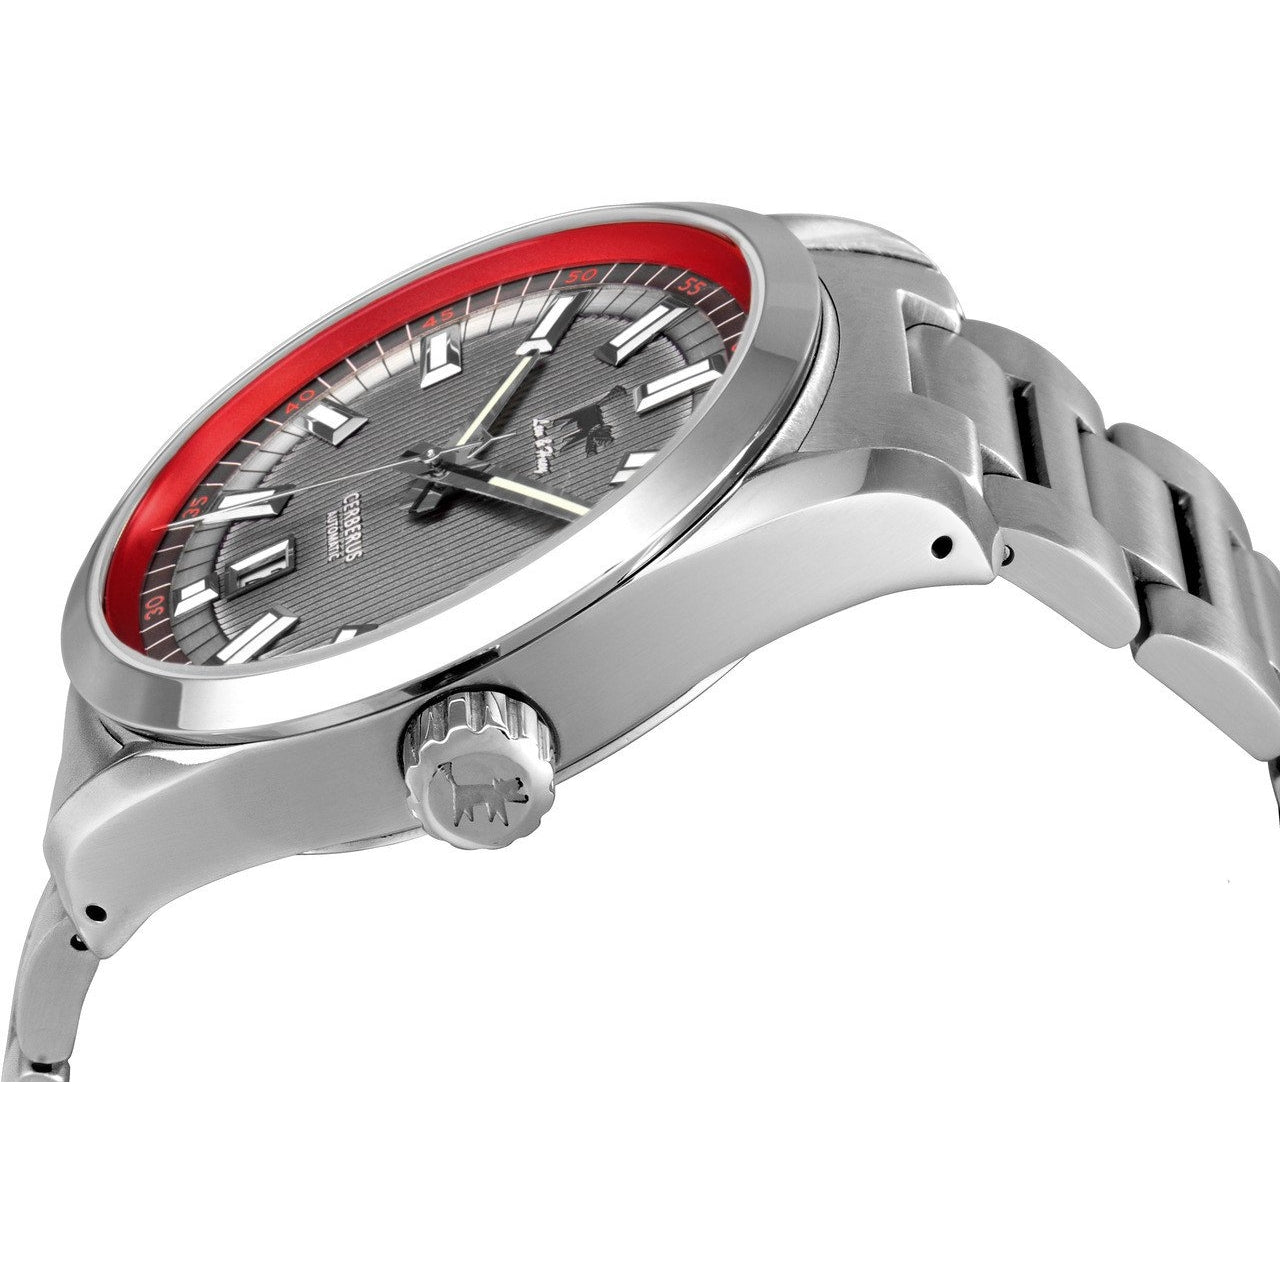 Lew and Huey Cerberus Automatic Watch (Grey & Red) - Watchfinder General - UK suppliers of Russian Vostok Parnis Watches MWC G10
 - 2